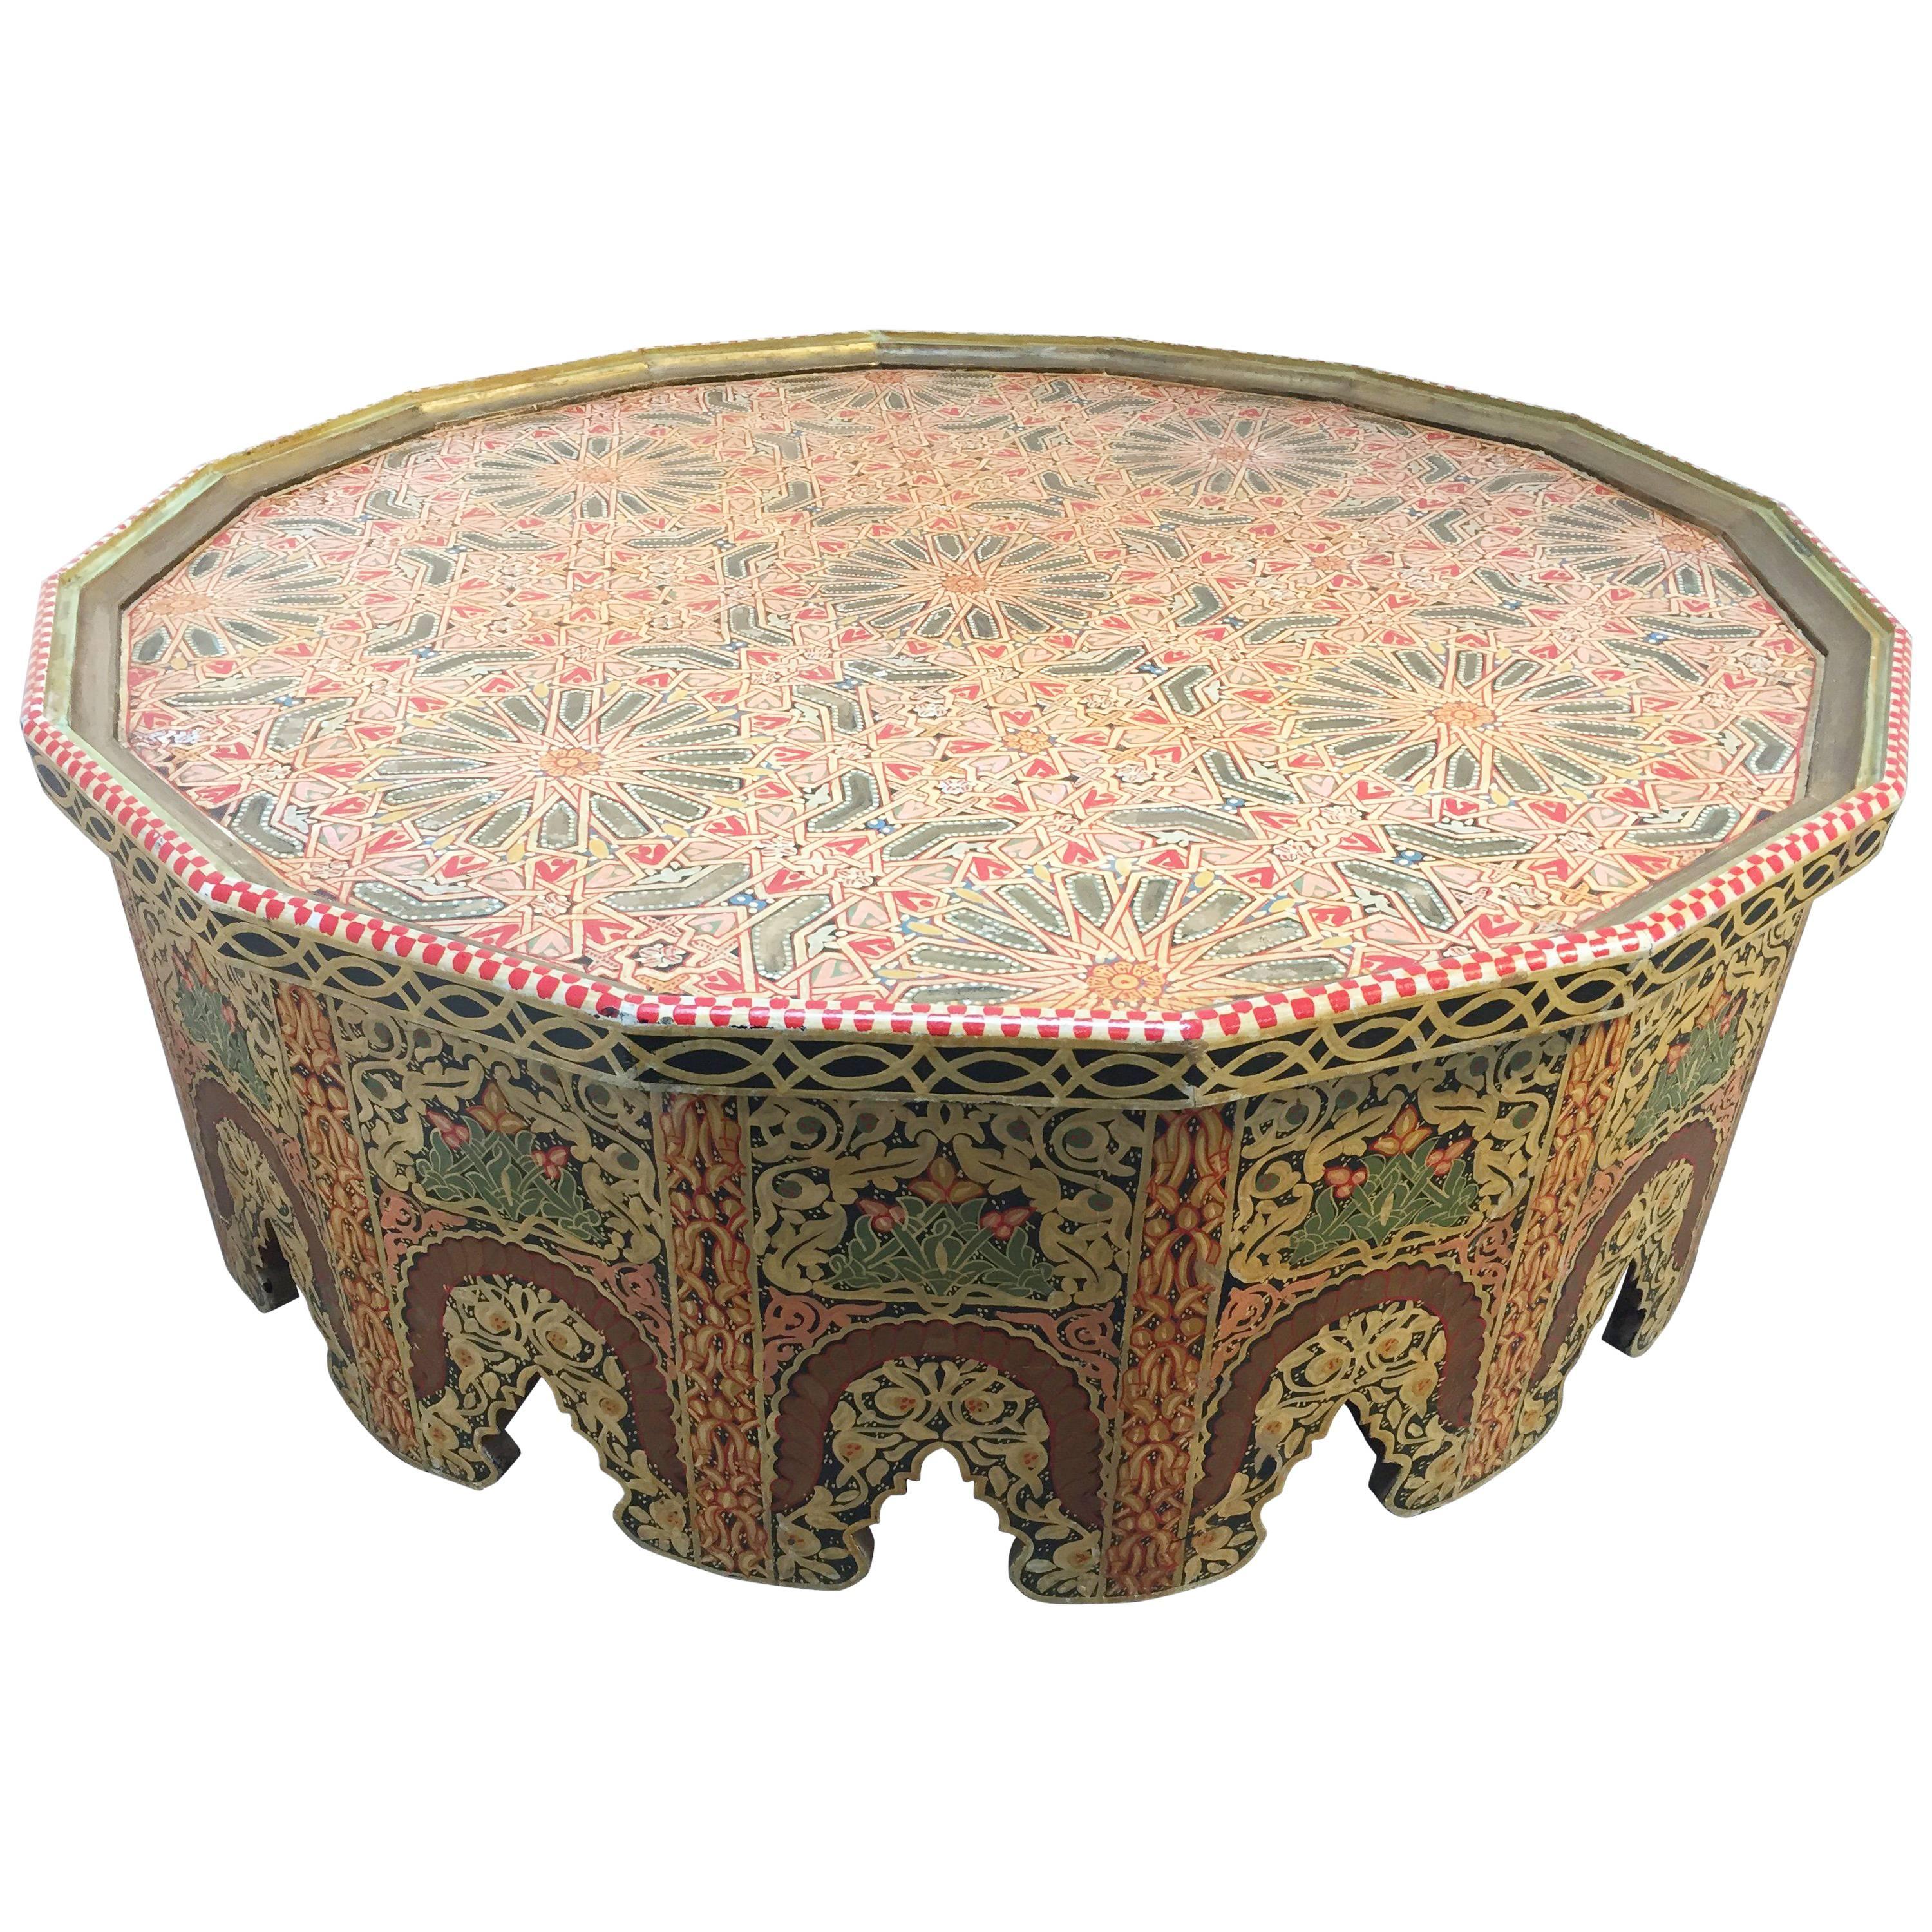 Moorish Moroccan Large Coffee Table Hand-Painted with Polychrome Colors